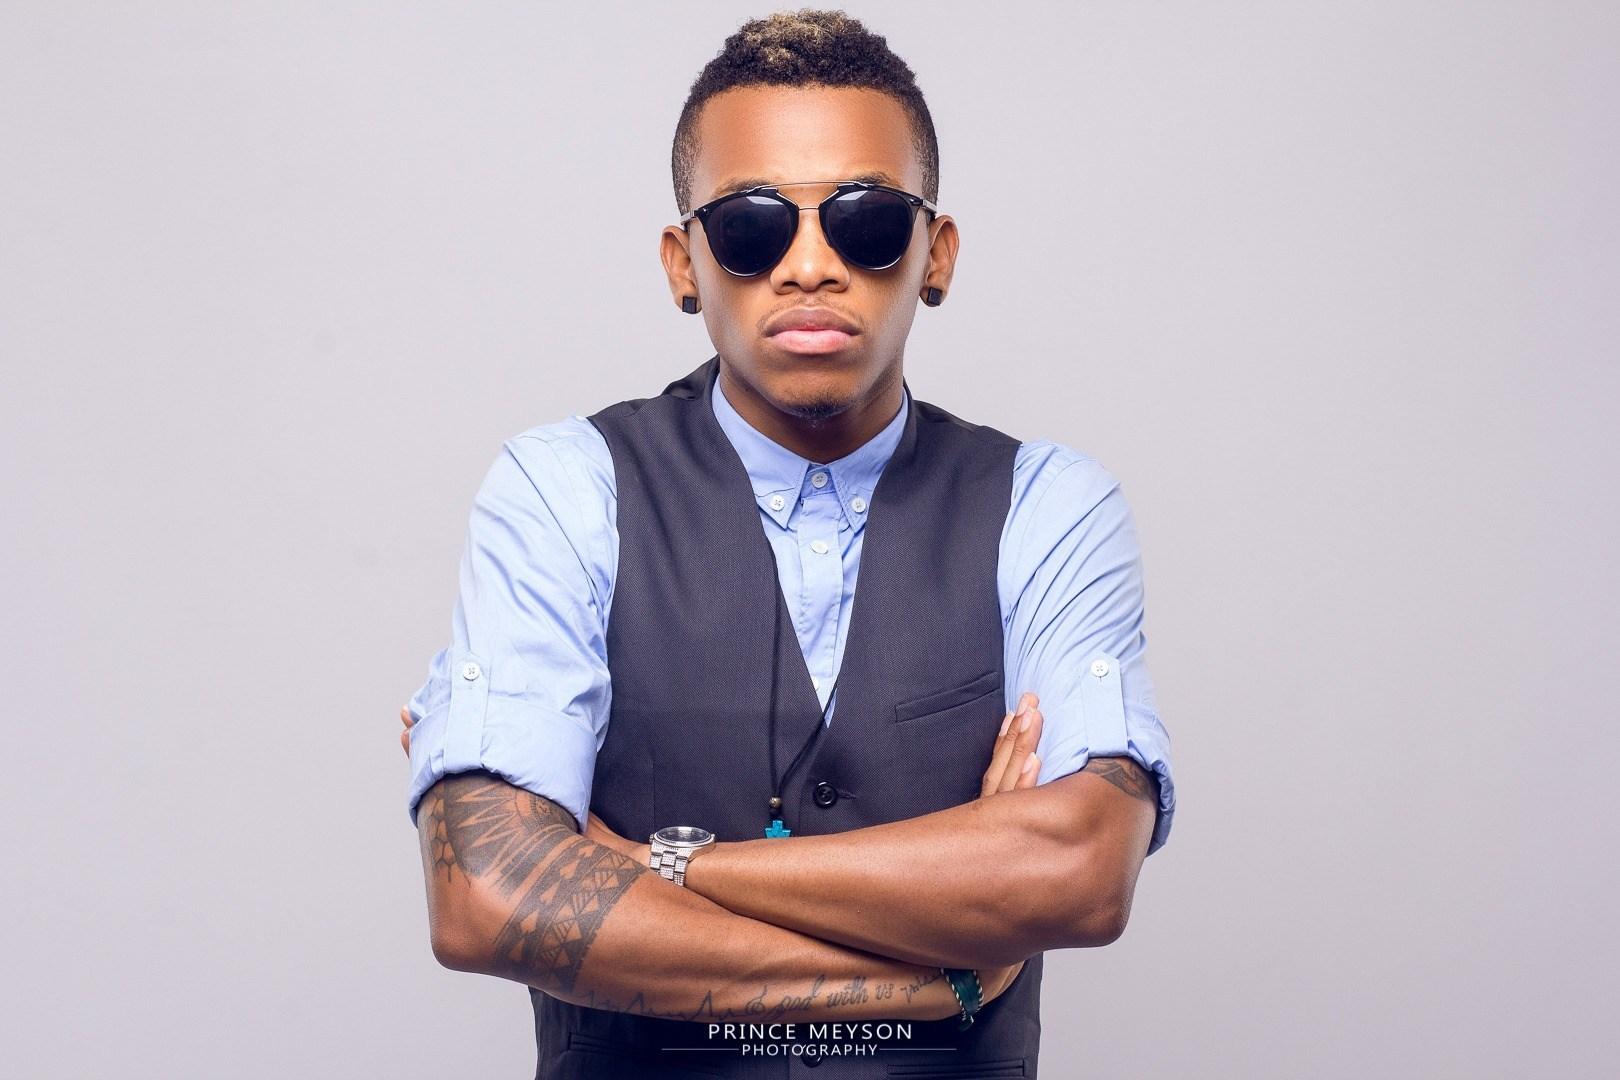 TEKNO SET TO SIGN DEAL WITH SONY MUSIC